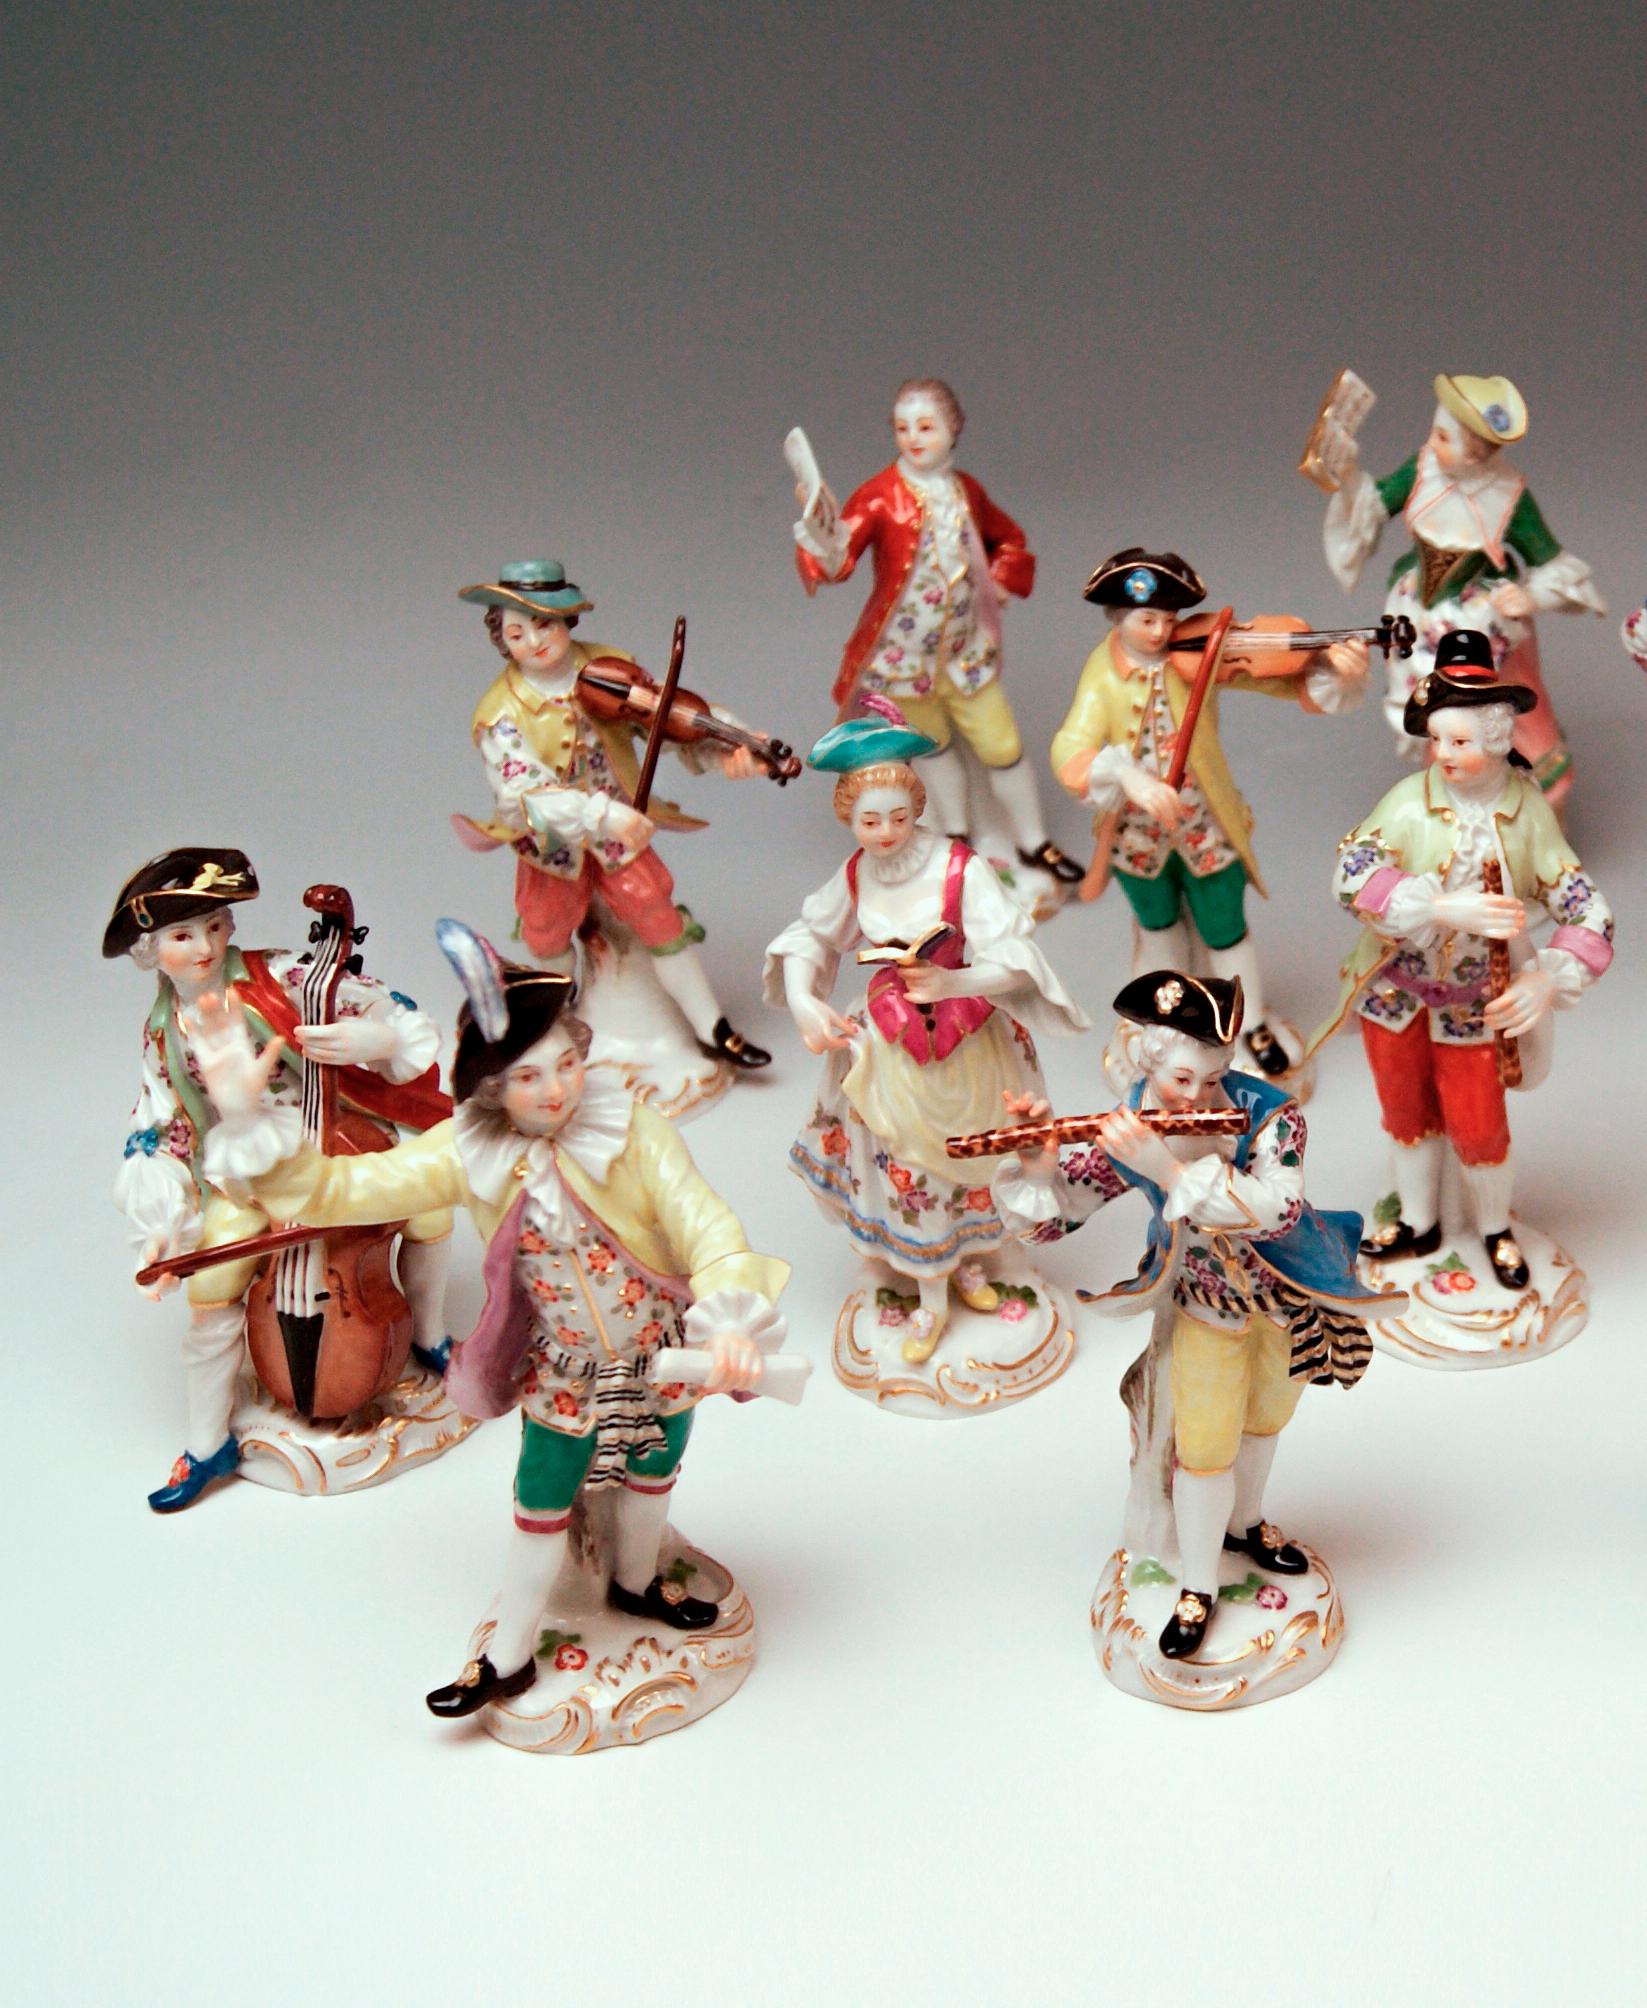 Meissen gorgeous group of figurines 'GALLANT ORCHESTRA', once created by Johann Joachim Kaendler (1706-1775) and Friedrich Elias Meyer (1723-1785): 16 figurines

Size:
Average height of figurines: circa 13.5 - 16.0 cm / 5.31 - 6.29